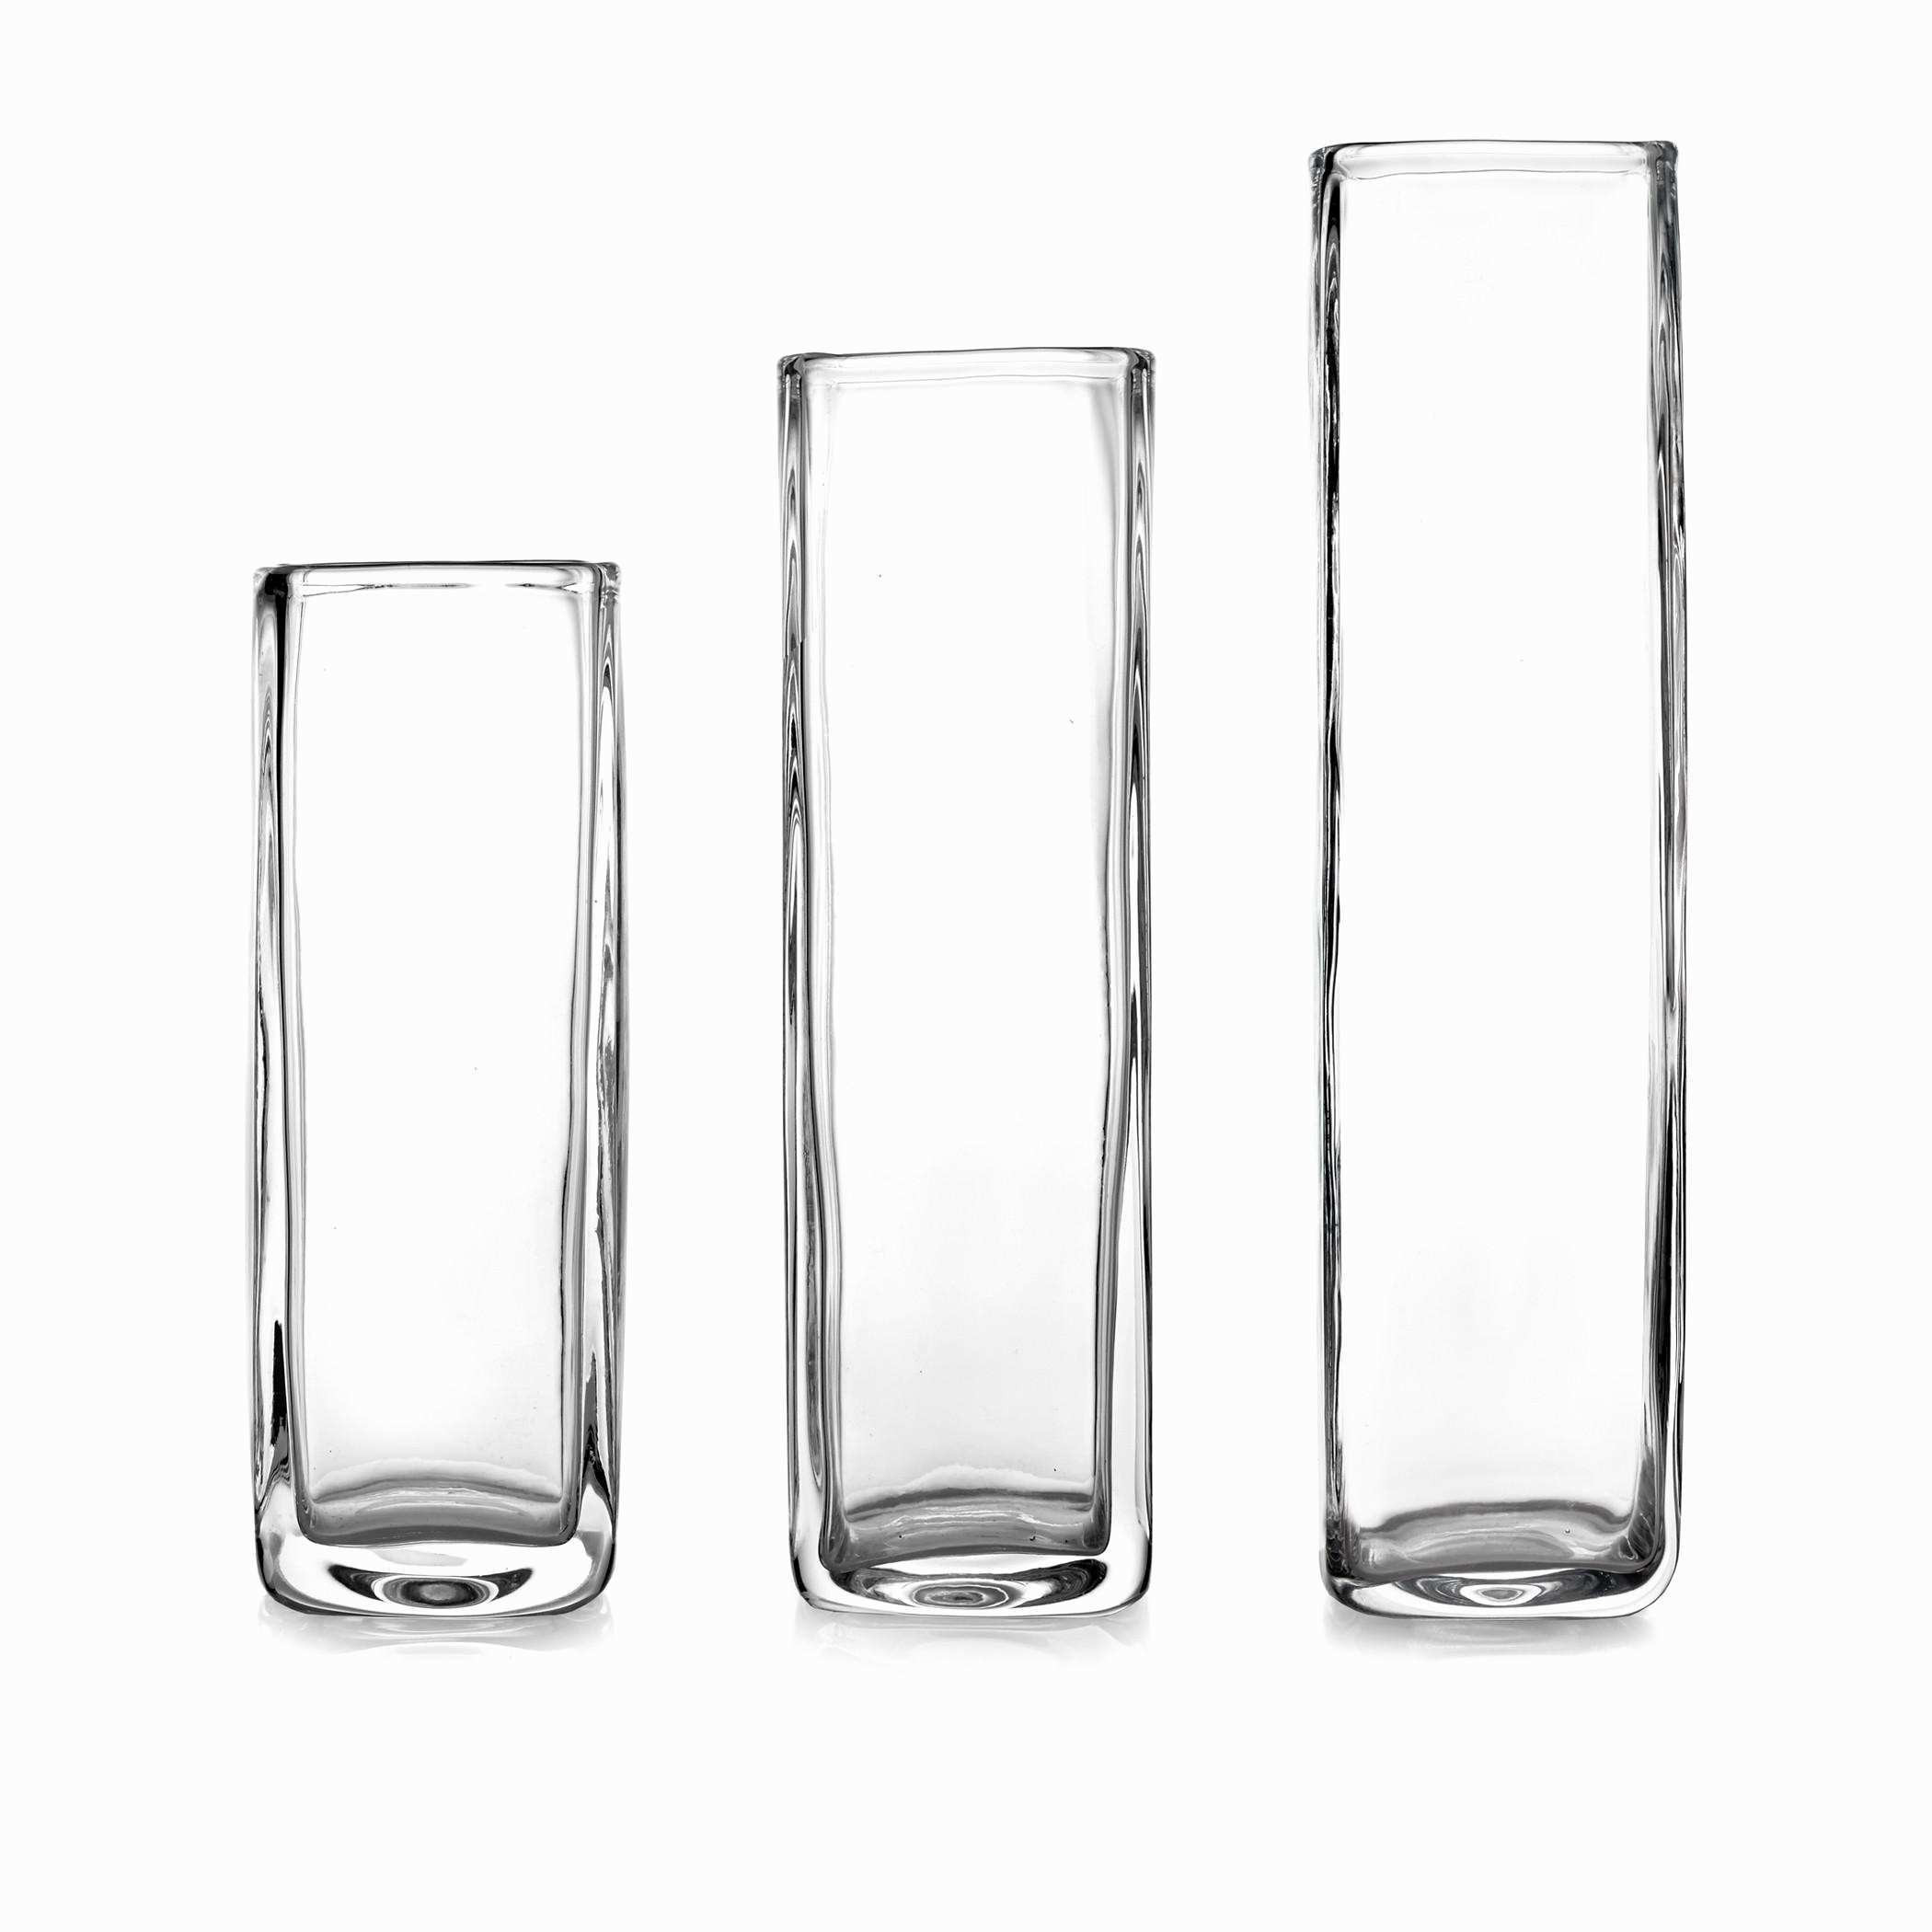 14 Great Clear Glass Rocks for Vases 2024 free download clear glass rocks for vases of black glass vases images glass wedding centerpieces inspirational regarding black glass vases images glass wedding centerpieces inspirational living room tall 